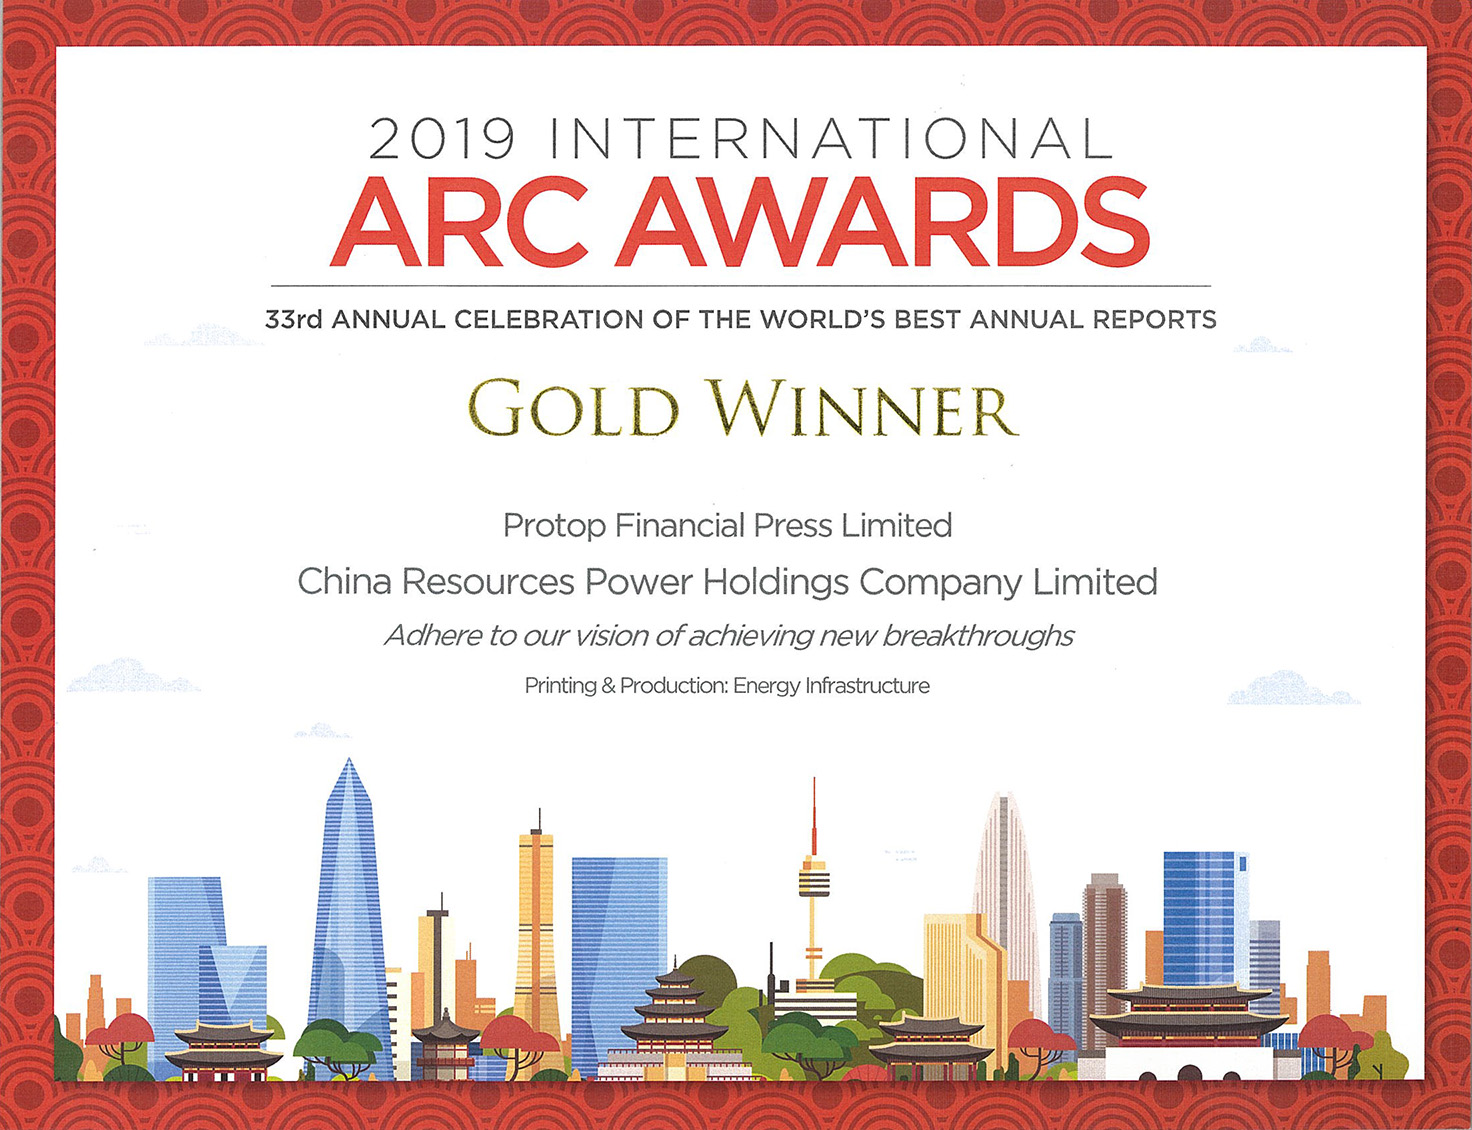 China Resources Power Holdings Company Limited – 2019 ARC AWARDS GOLD WINNER Printing & Production: Energy Infrastructure